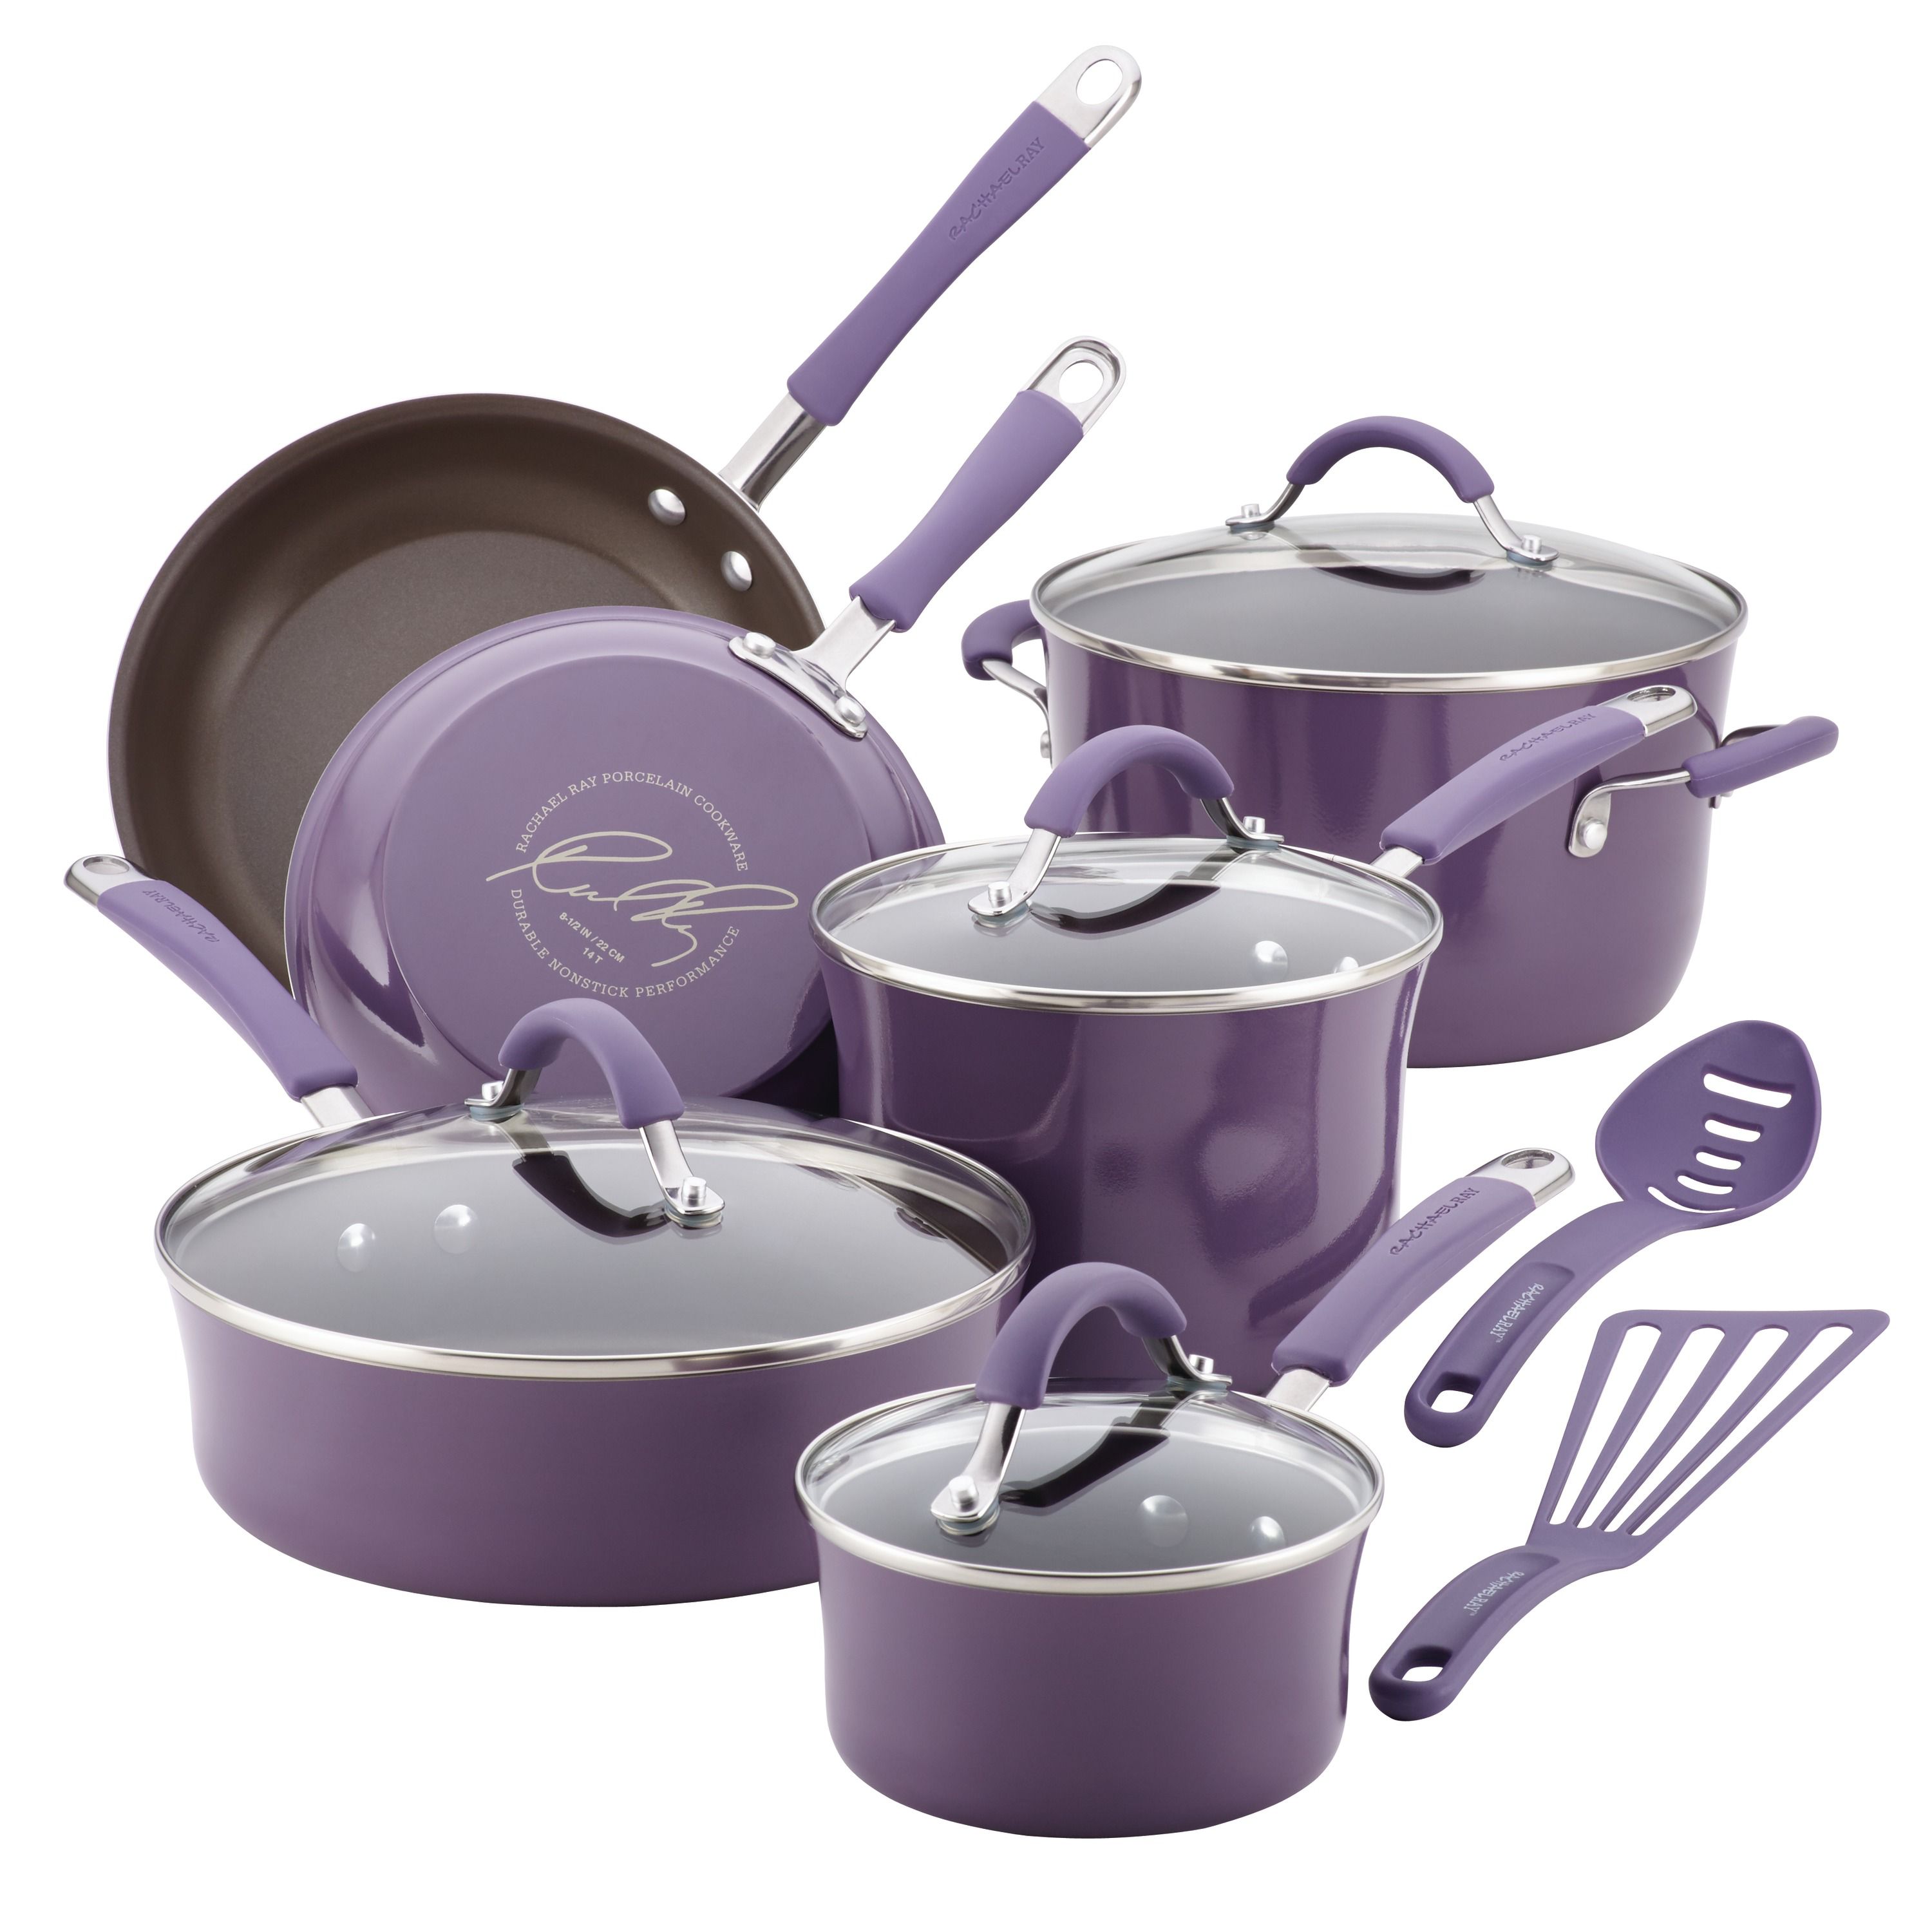 Pots and Pans Sets for sale in Cleveland, Ohio